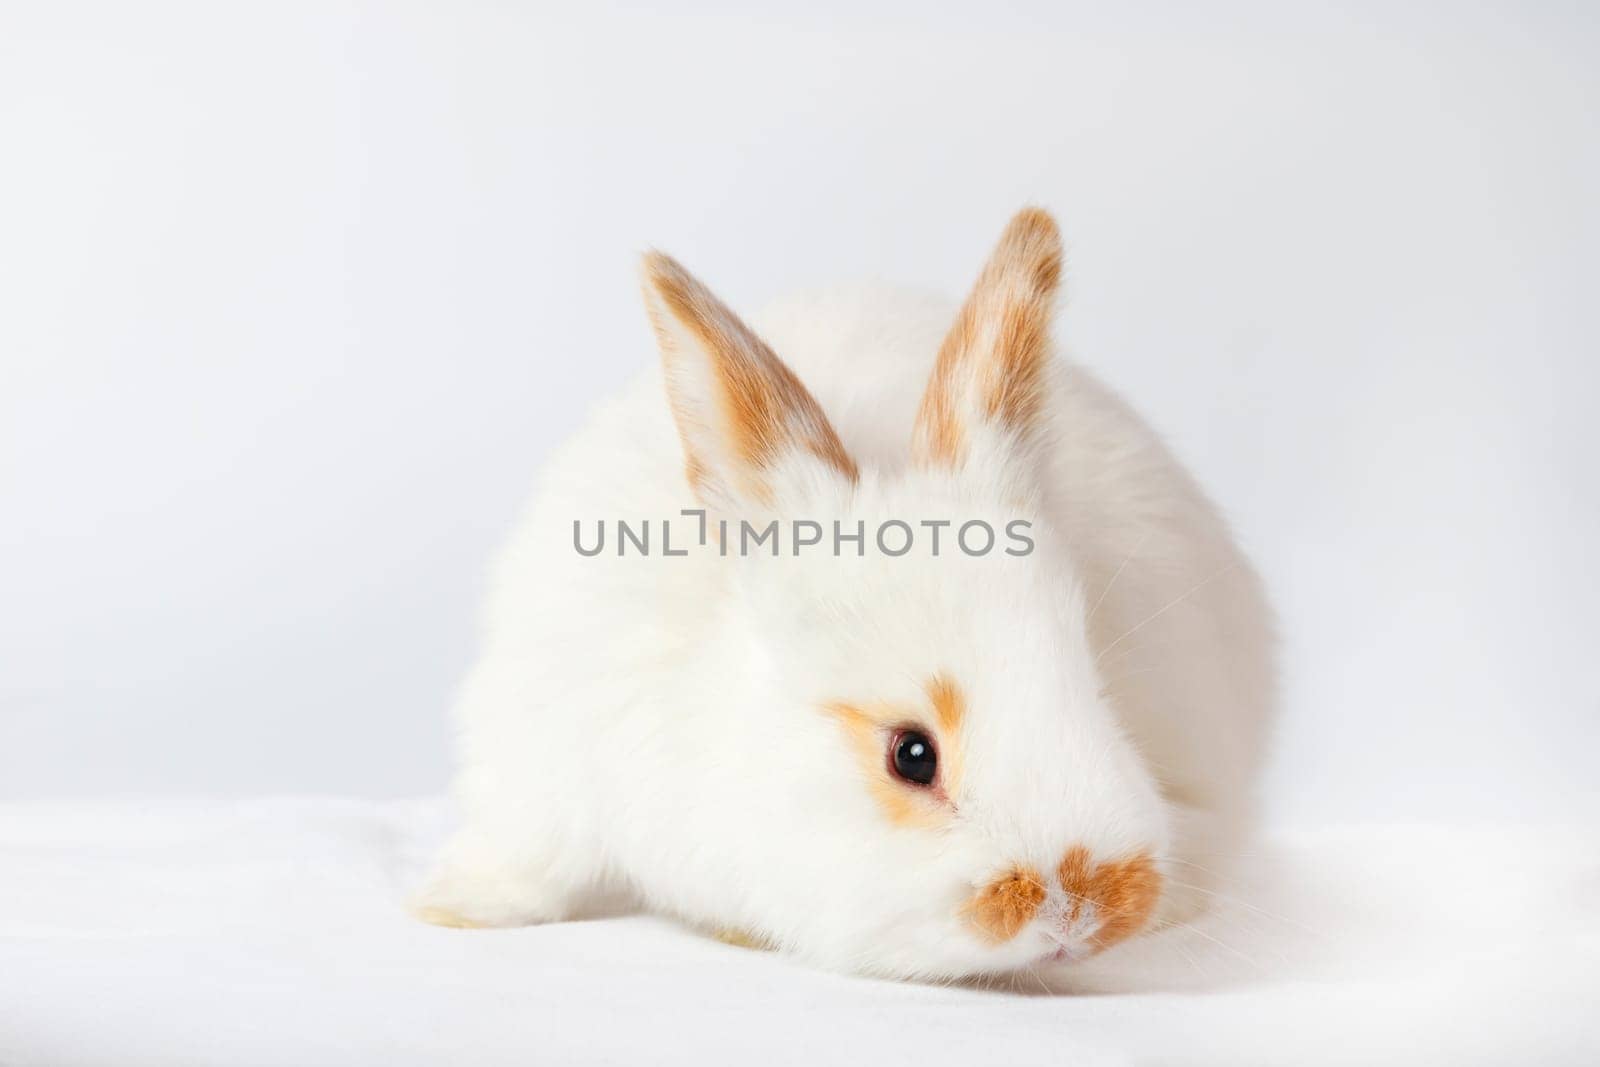 rabbit with glasses on a white background, baby animals